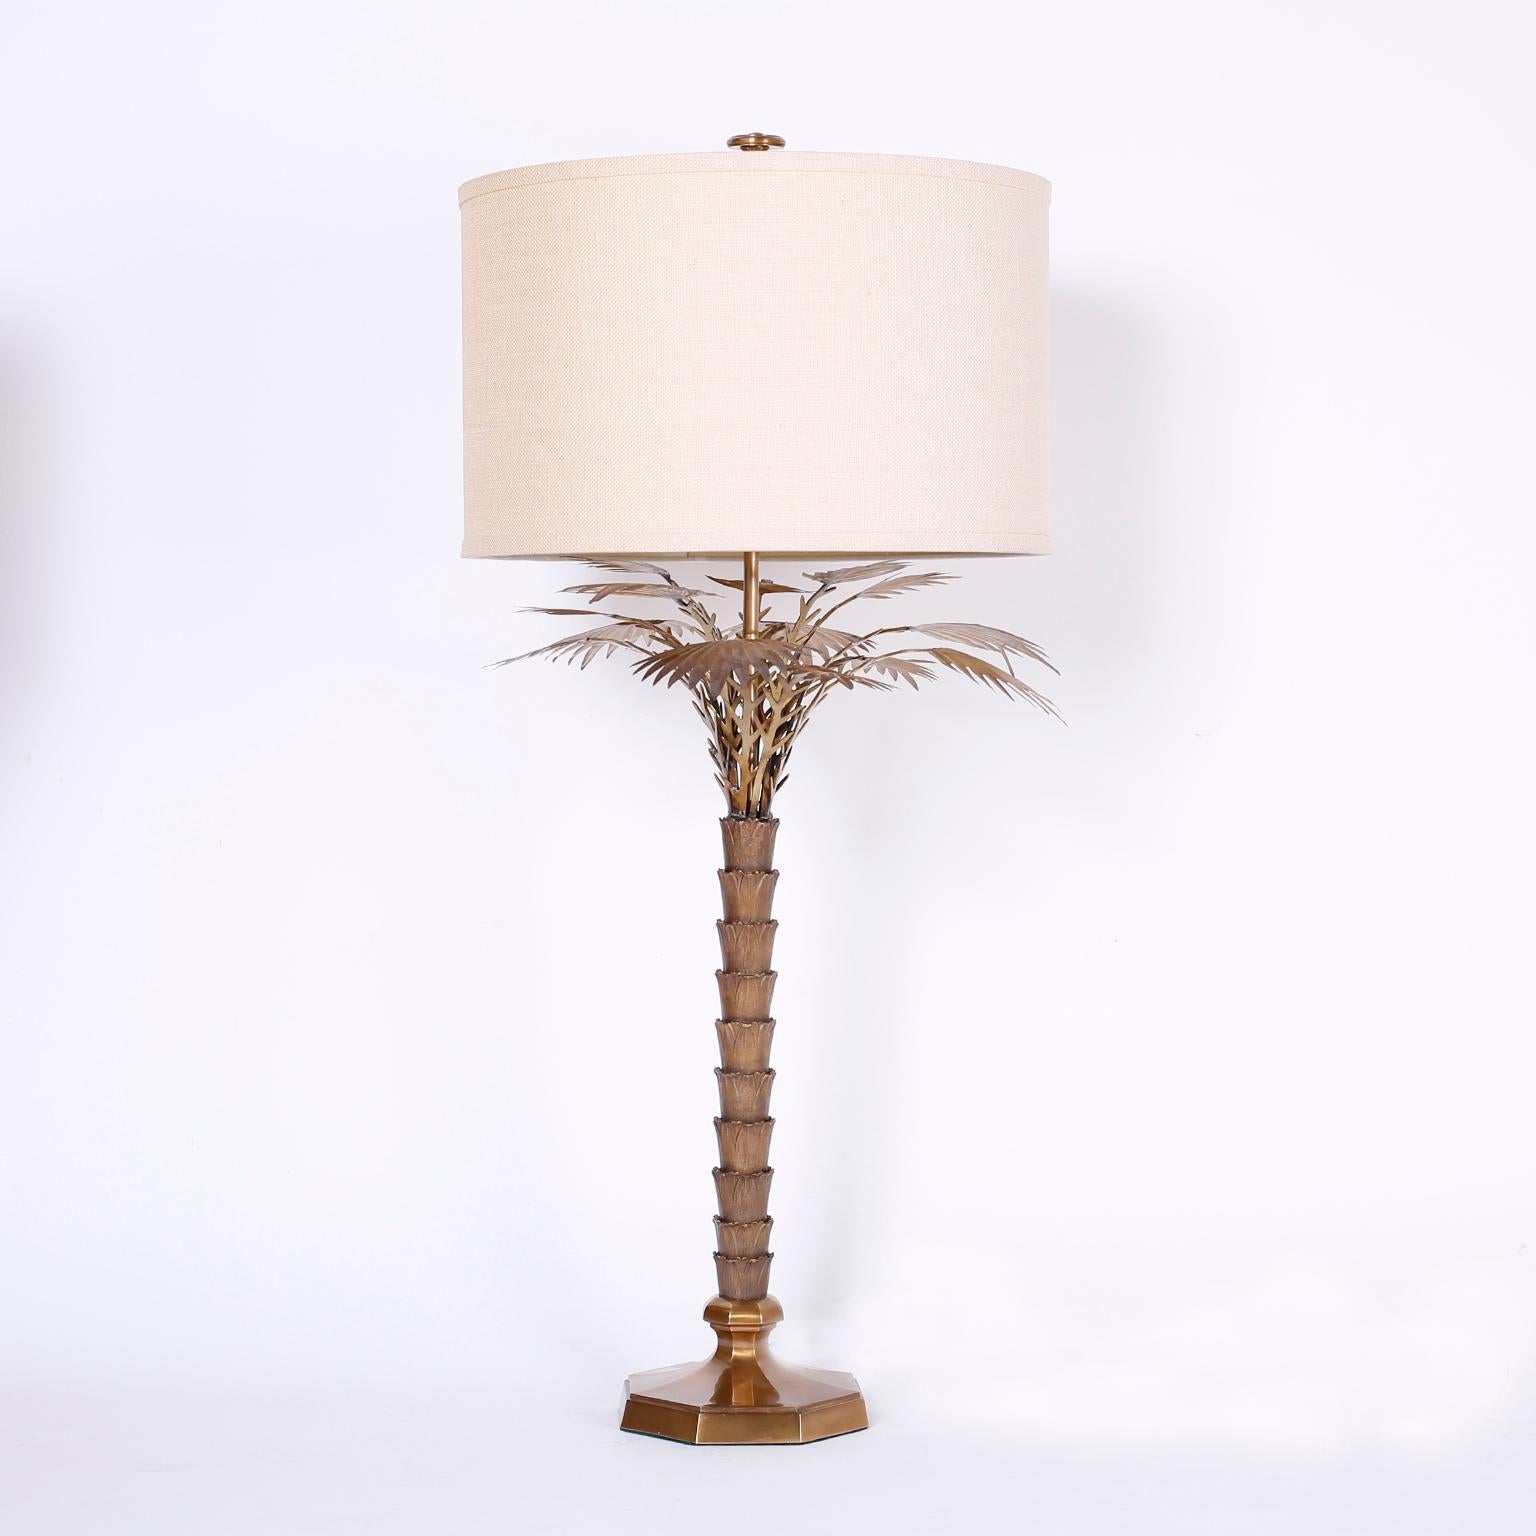 Chic pair of stylized palm tree table lamps crafted in bronze having a custom acid washed finish and lacquered for easy care.